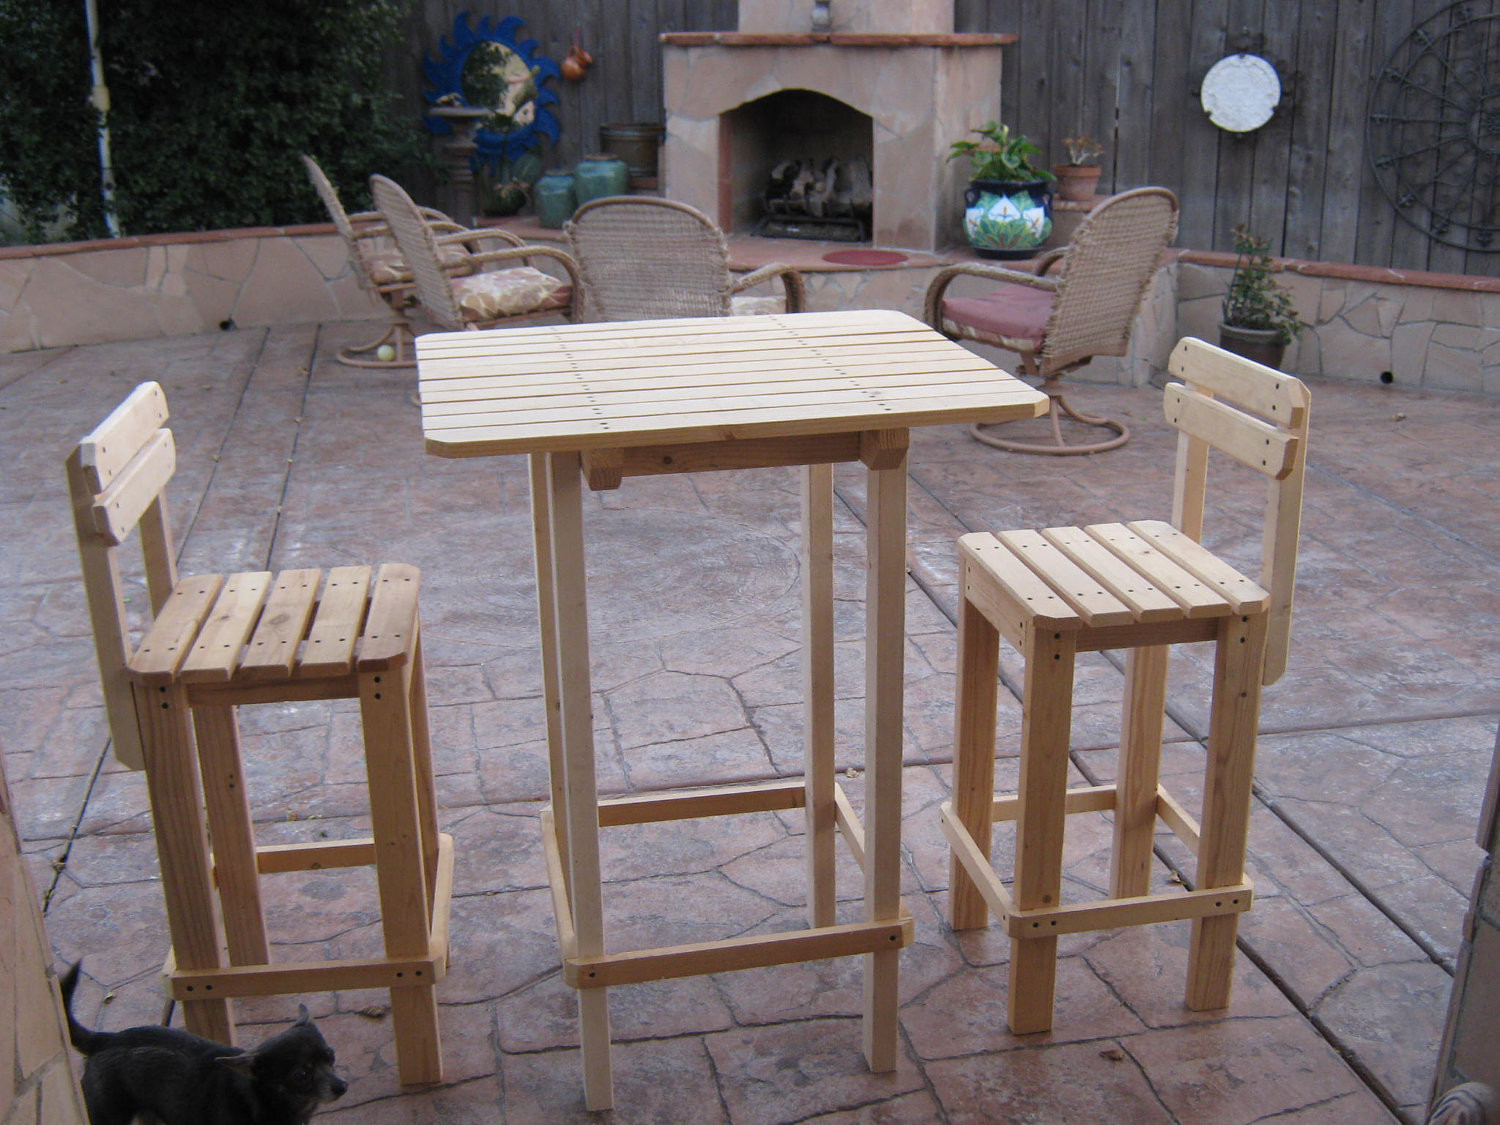 DIY Patio Bar Plans
 DIY PLANS to make Bar Table and Stool Set by wingstoshop